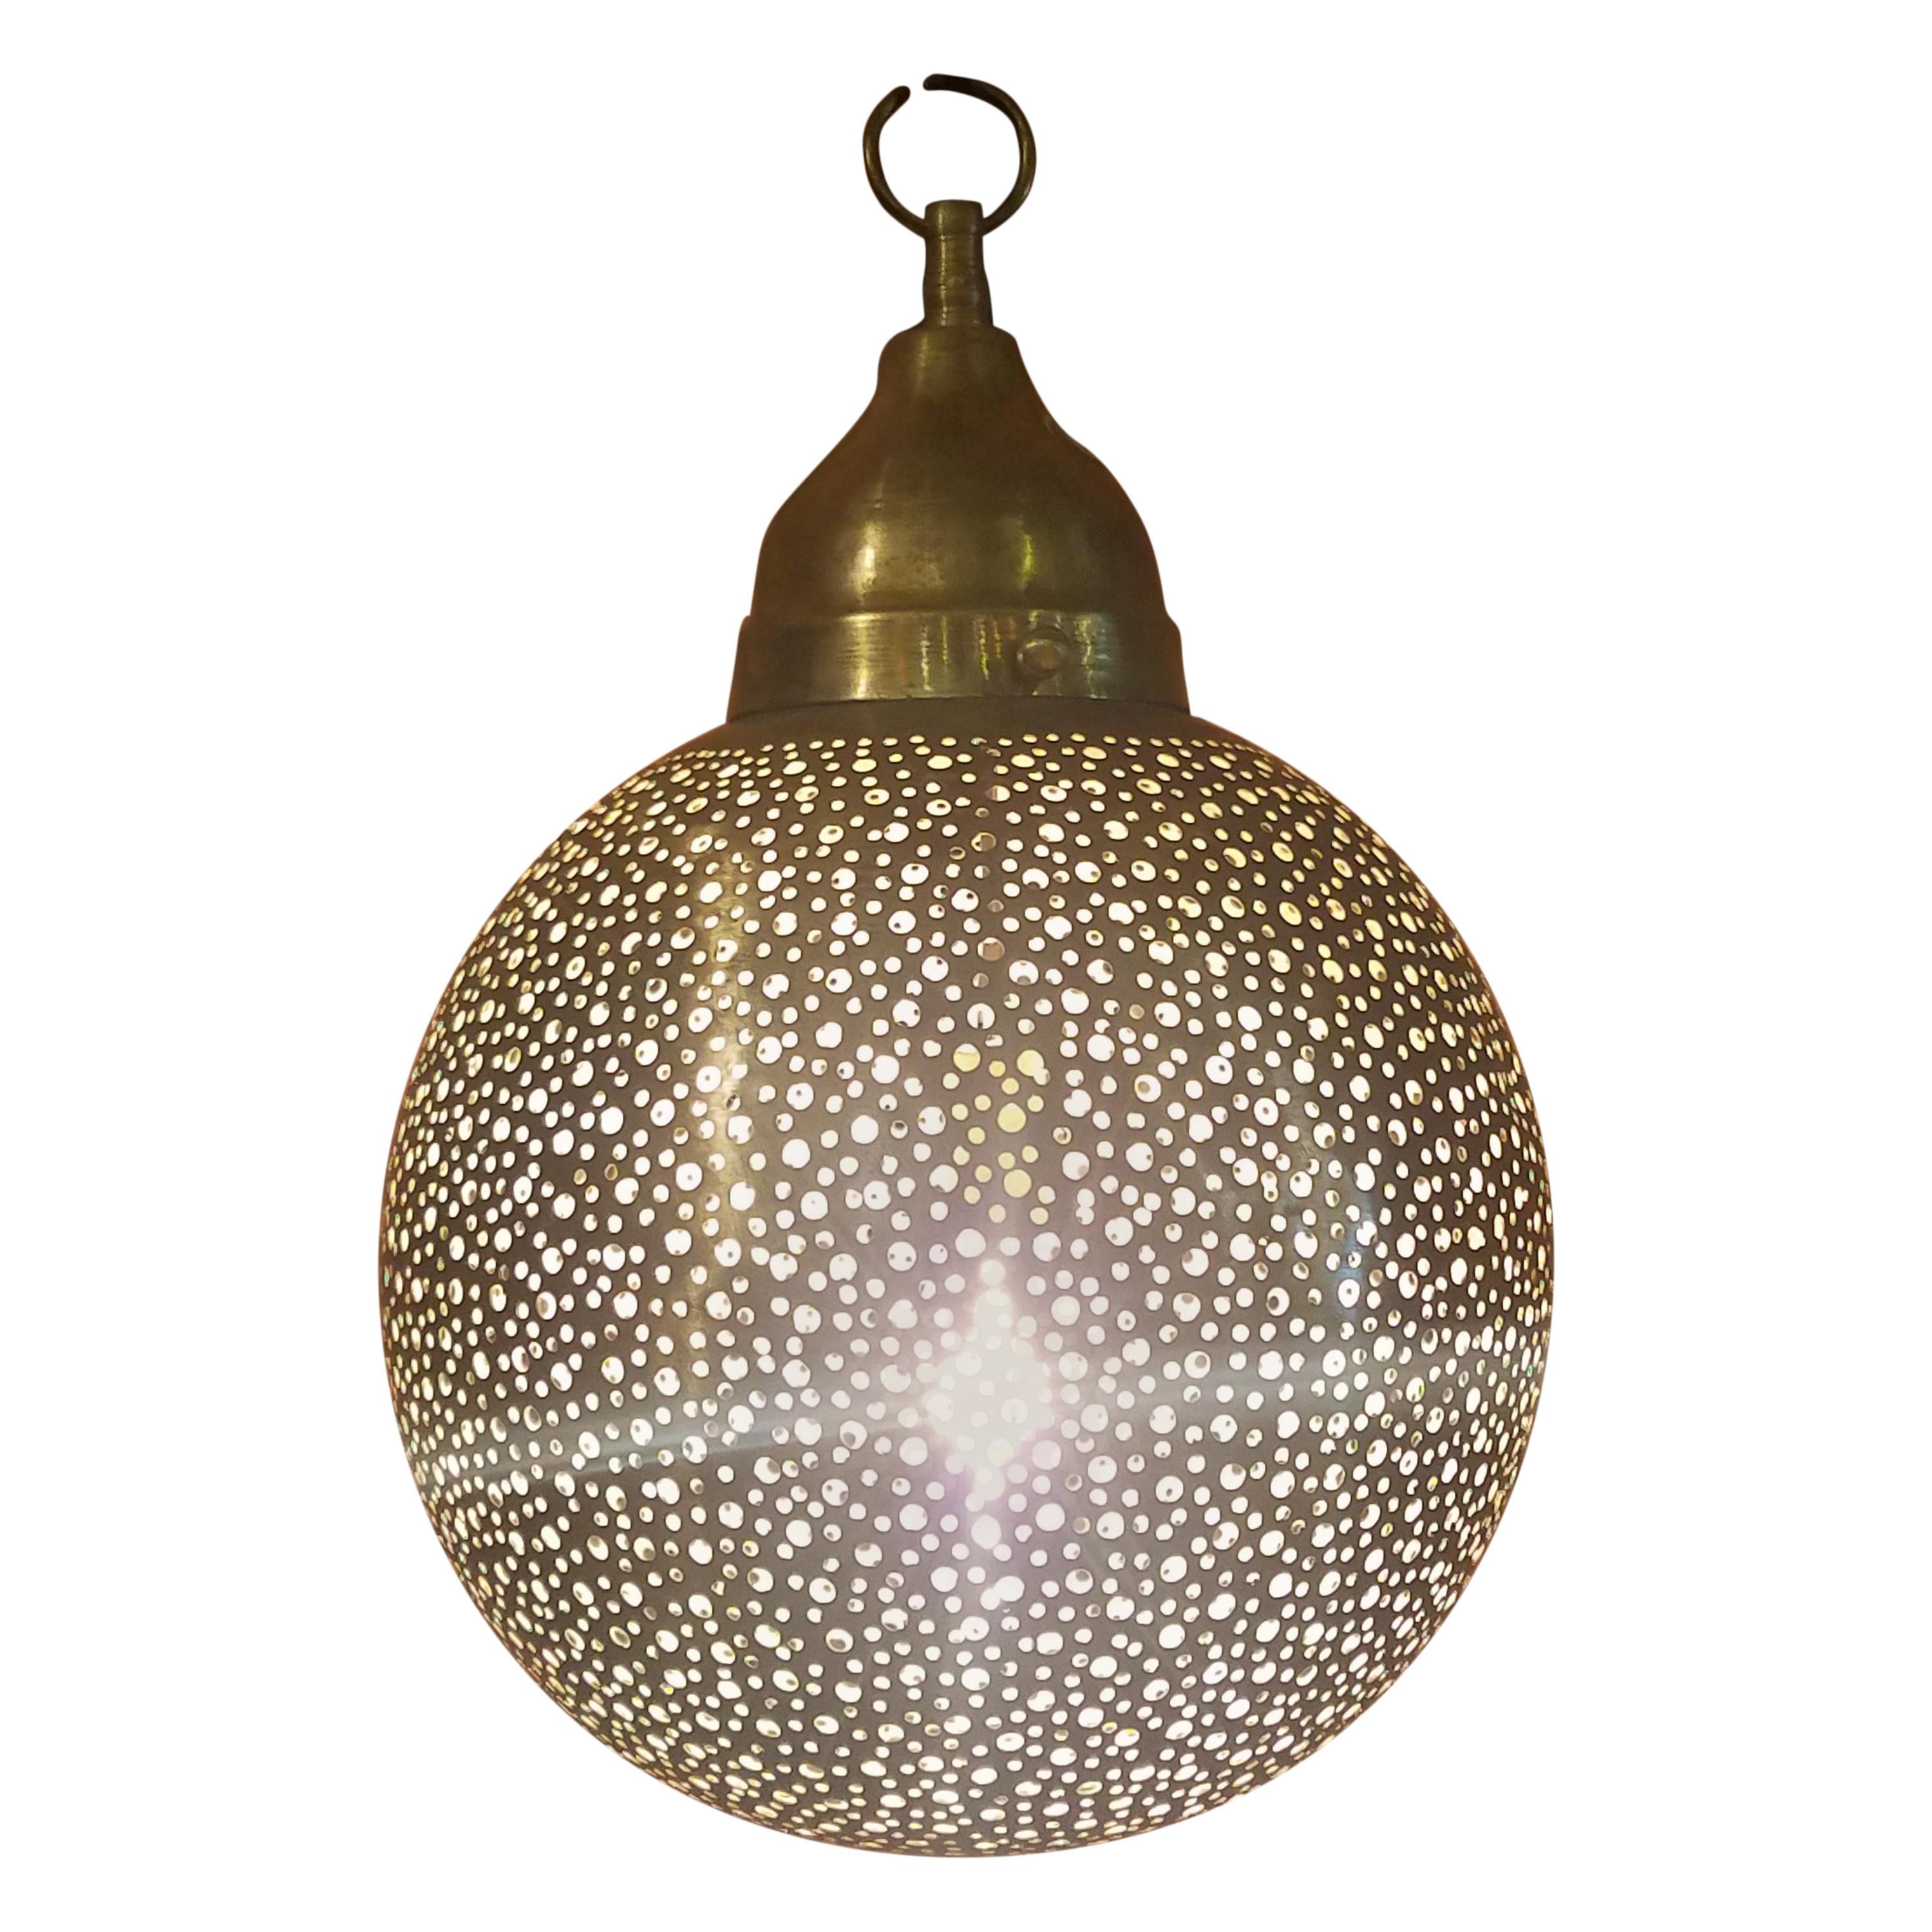 Intricate Moroccan Copper Wall or Ceiling Lamp or Lantern, Ball Shape For Sale